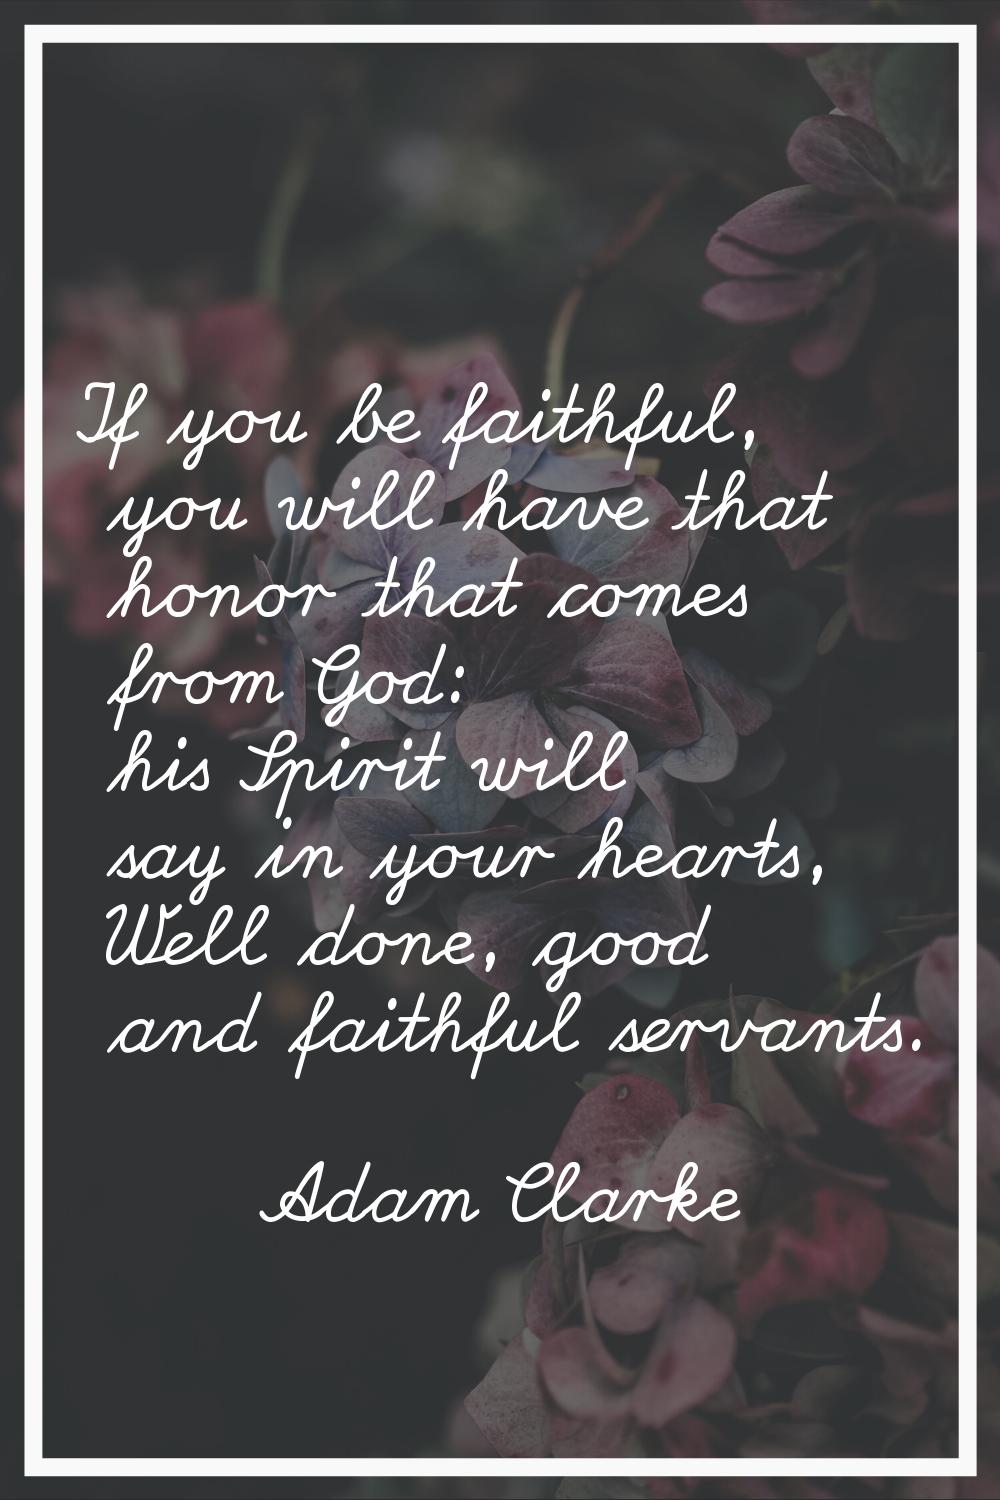 If you be faithful, you will have that honor that comes from God: his Spirit will say in your heart